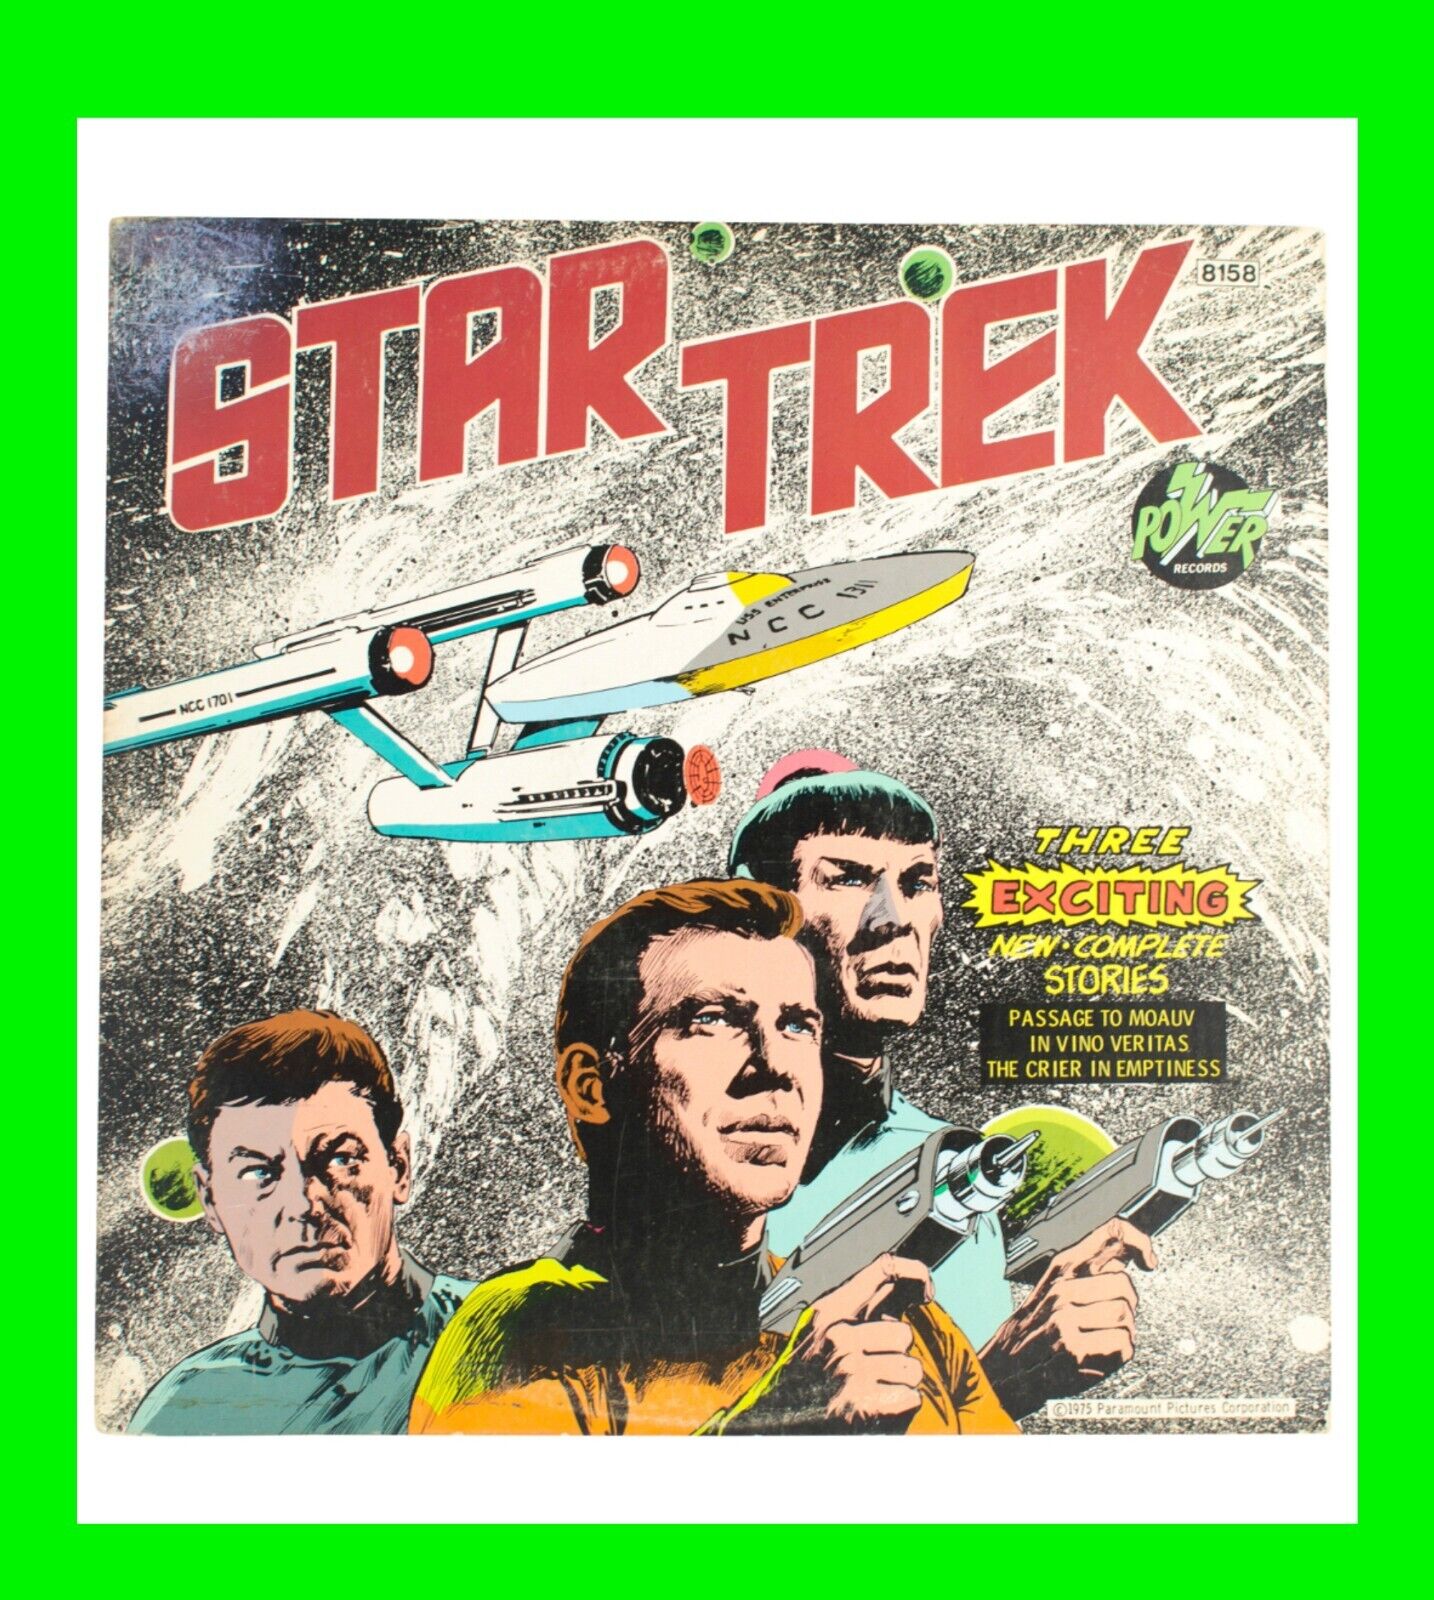 Vintage Star Trek Three Exciting New Complete Stories 1975 LP Record Power 8158